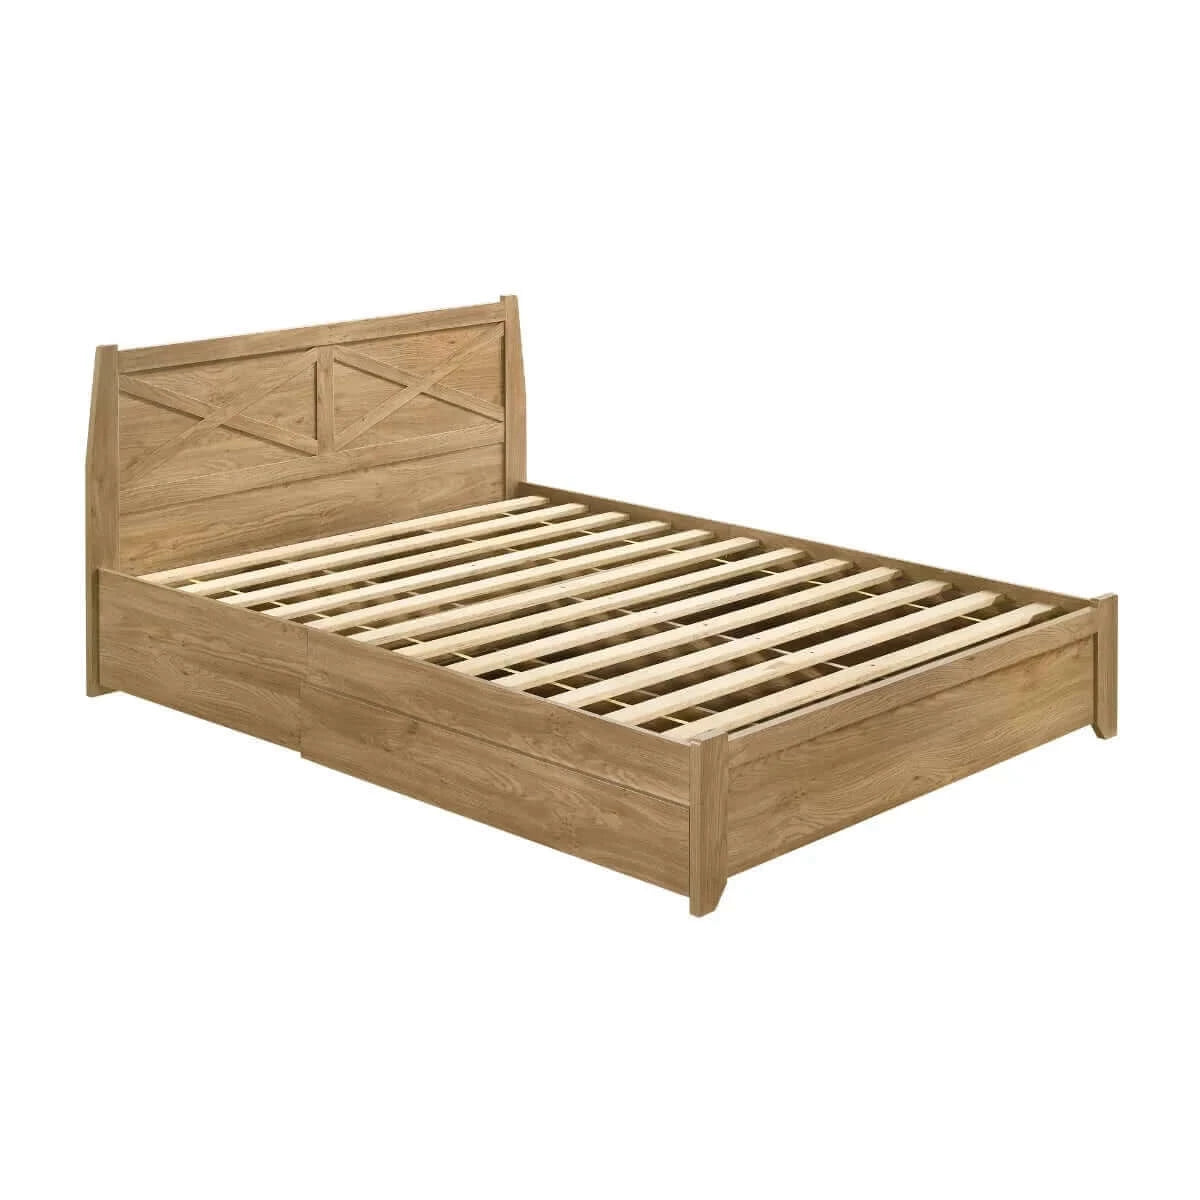 Buy mica natural wooden bed frame with storage drawers double - upinteriors-Upinteriors